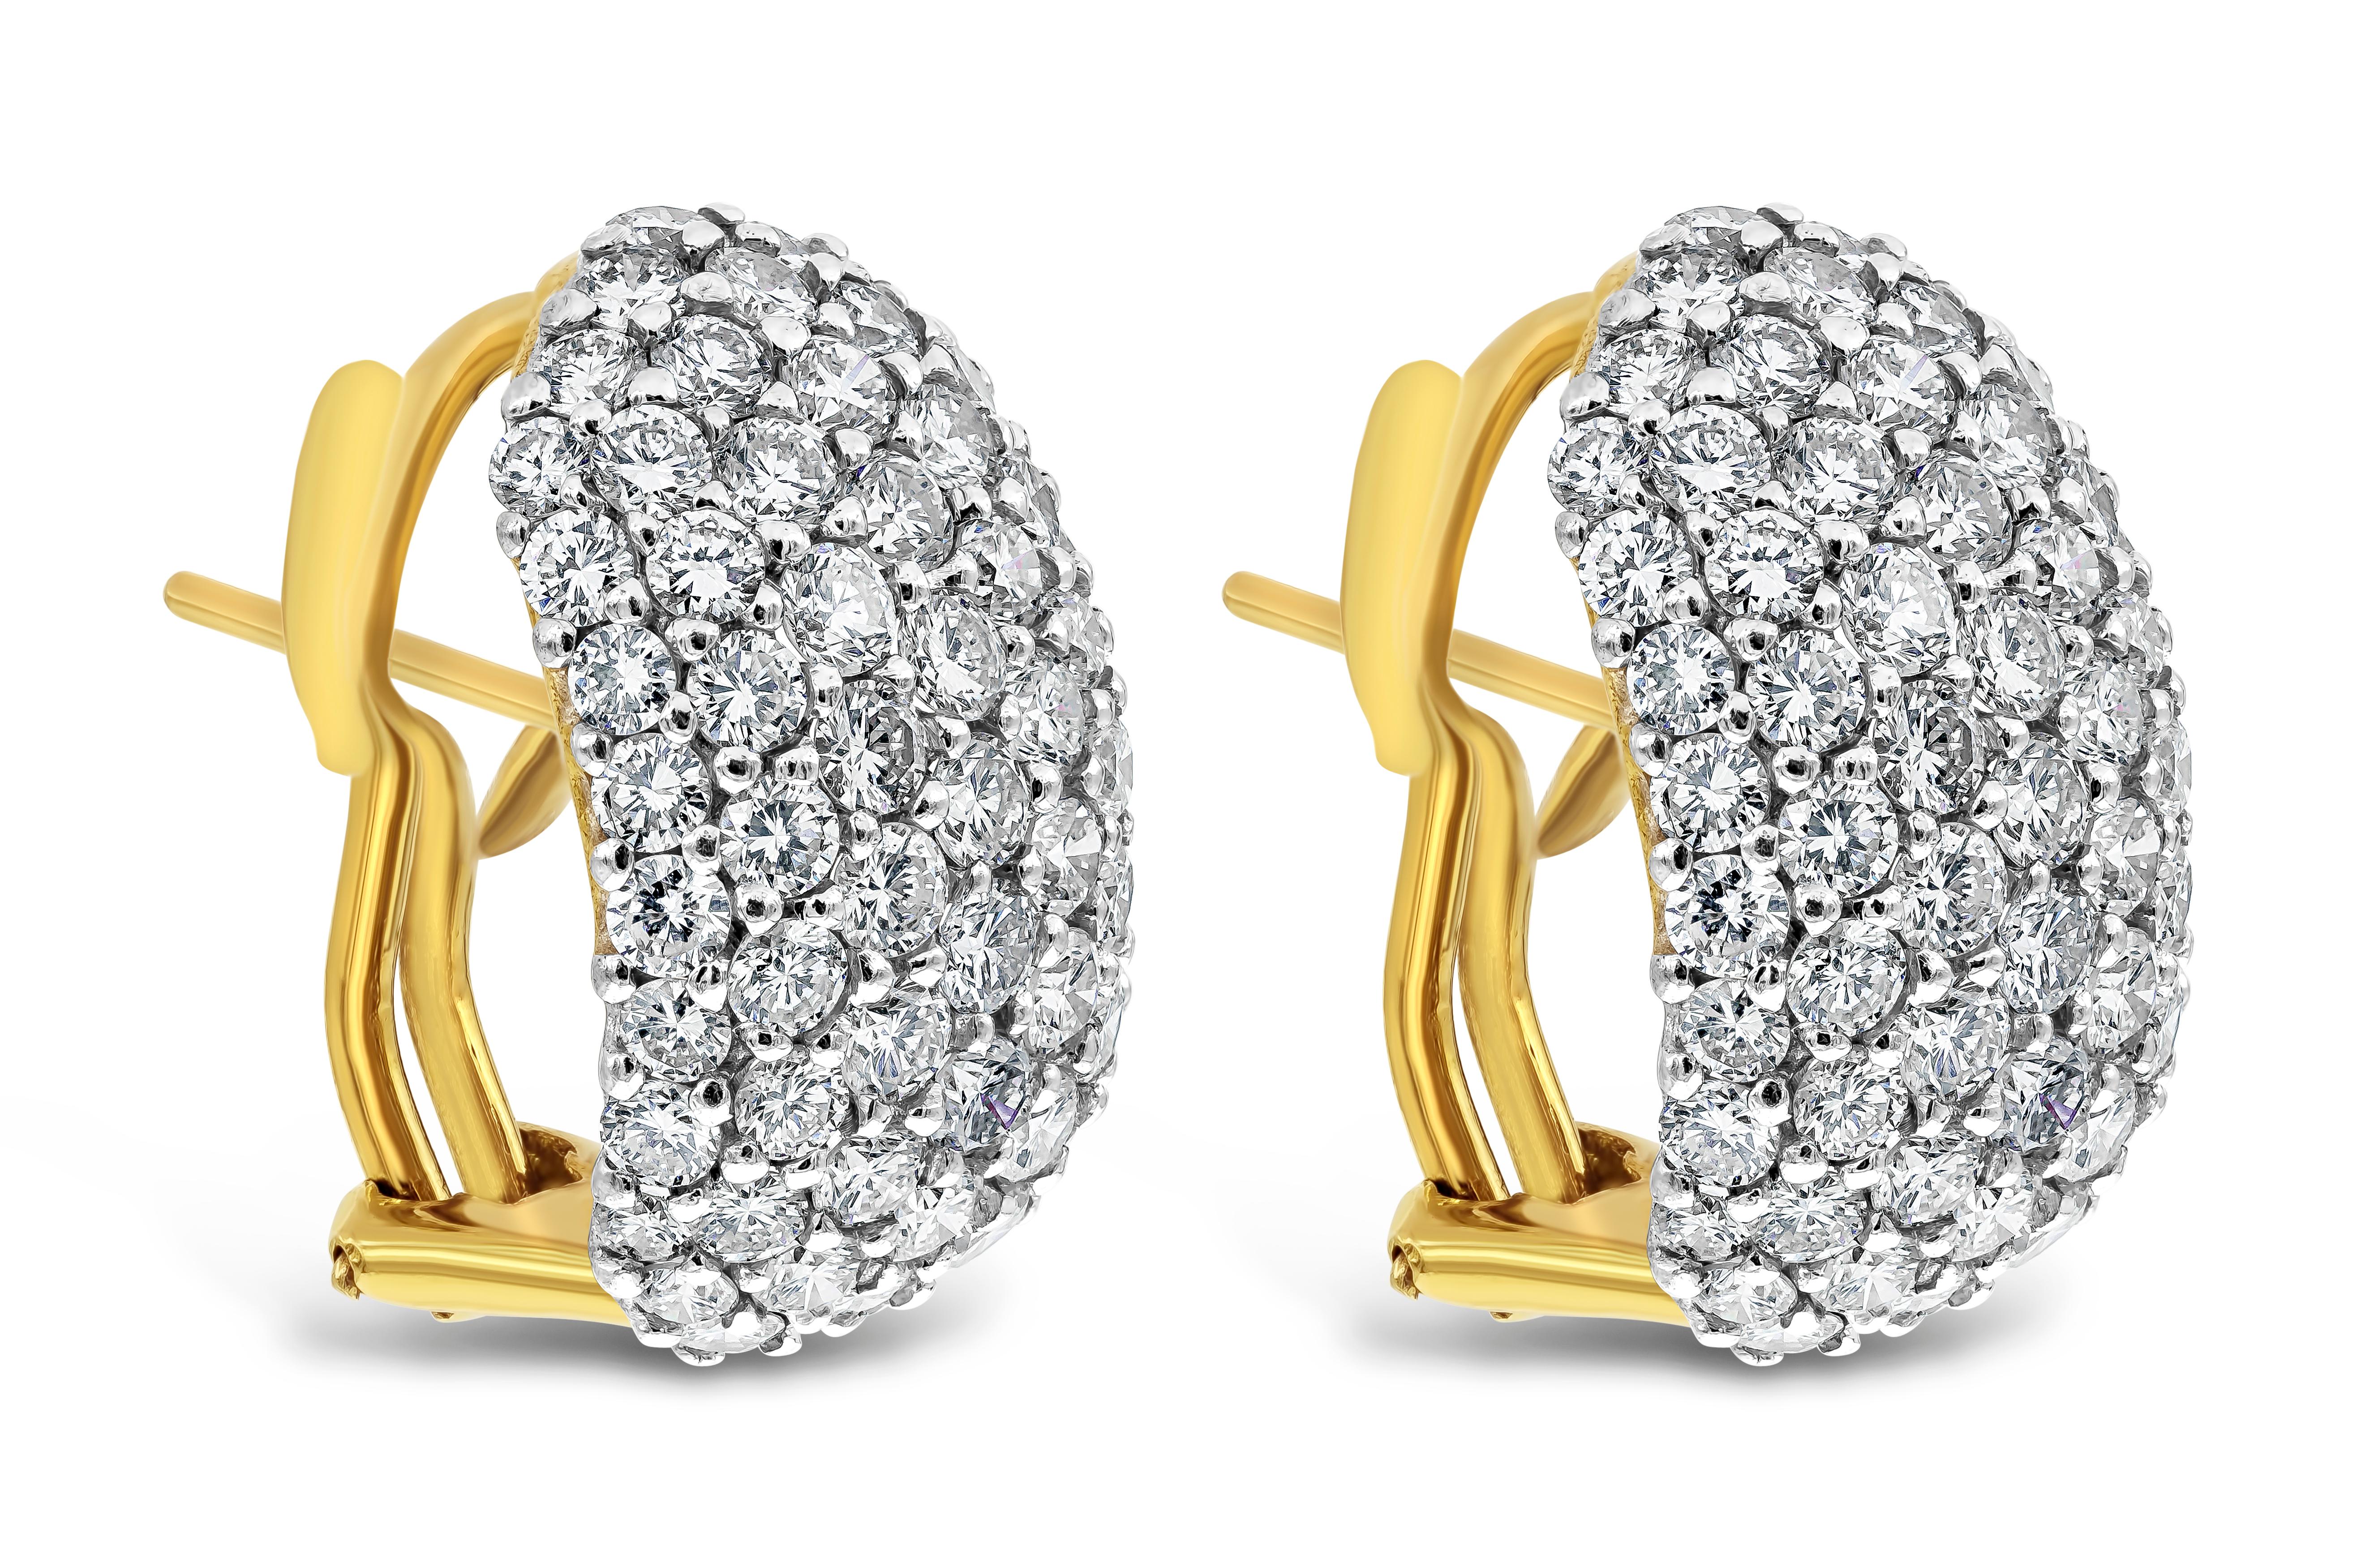 A brilliant and simple style earrings showcasing a cluster of brilliant round diamonds weighing 6.49 carats total, G-H Color, VS in clarity. Micro-pave set in a oval dome made in 18k yellow gold. Omega-clip backs with post.

Style available in